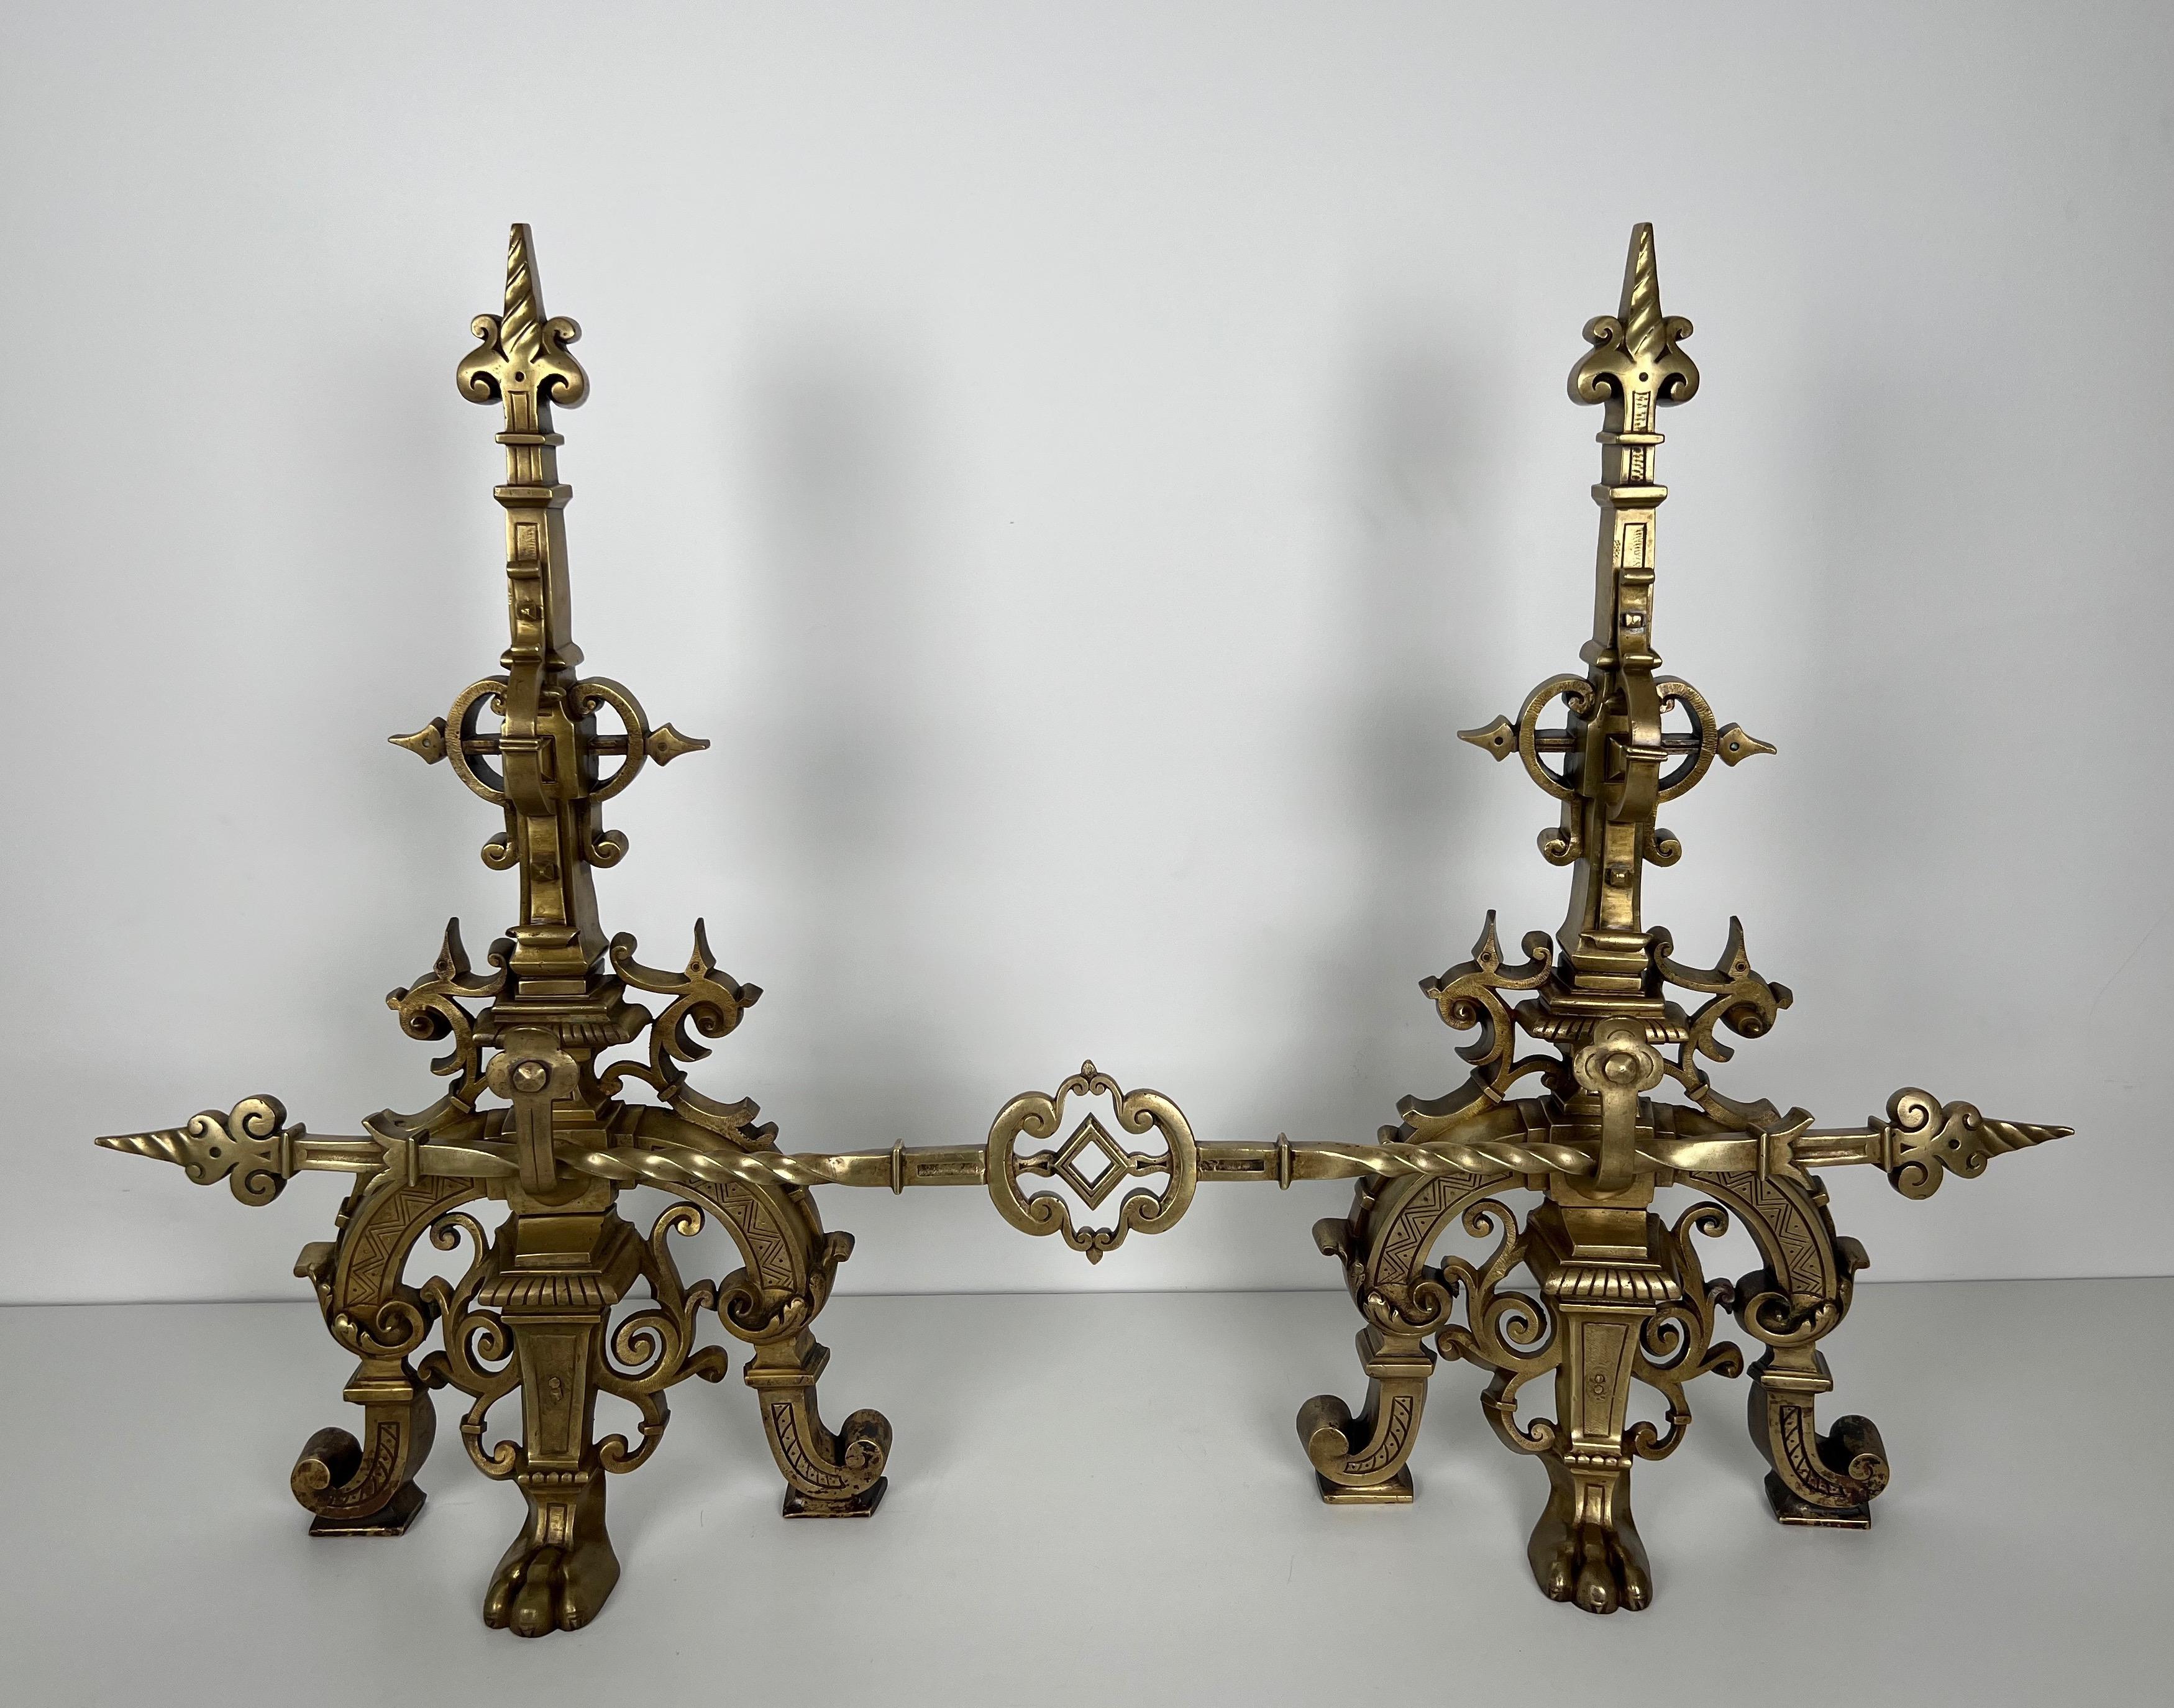 This rare and important bronze fireplace set is composed of a pair of richly decorated bronze andirons and of a central bar connecting the 2 andirons. This is a French Renaissance style work. 19th century